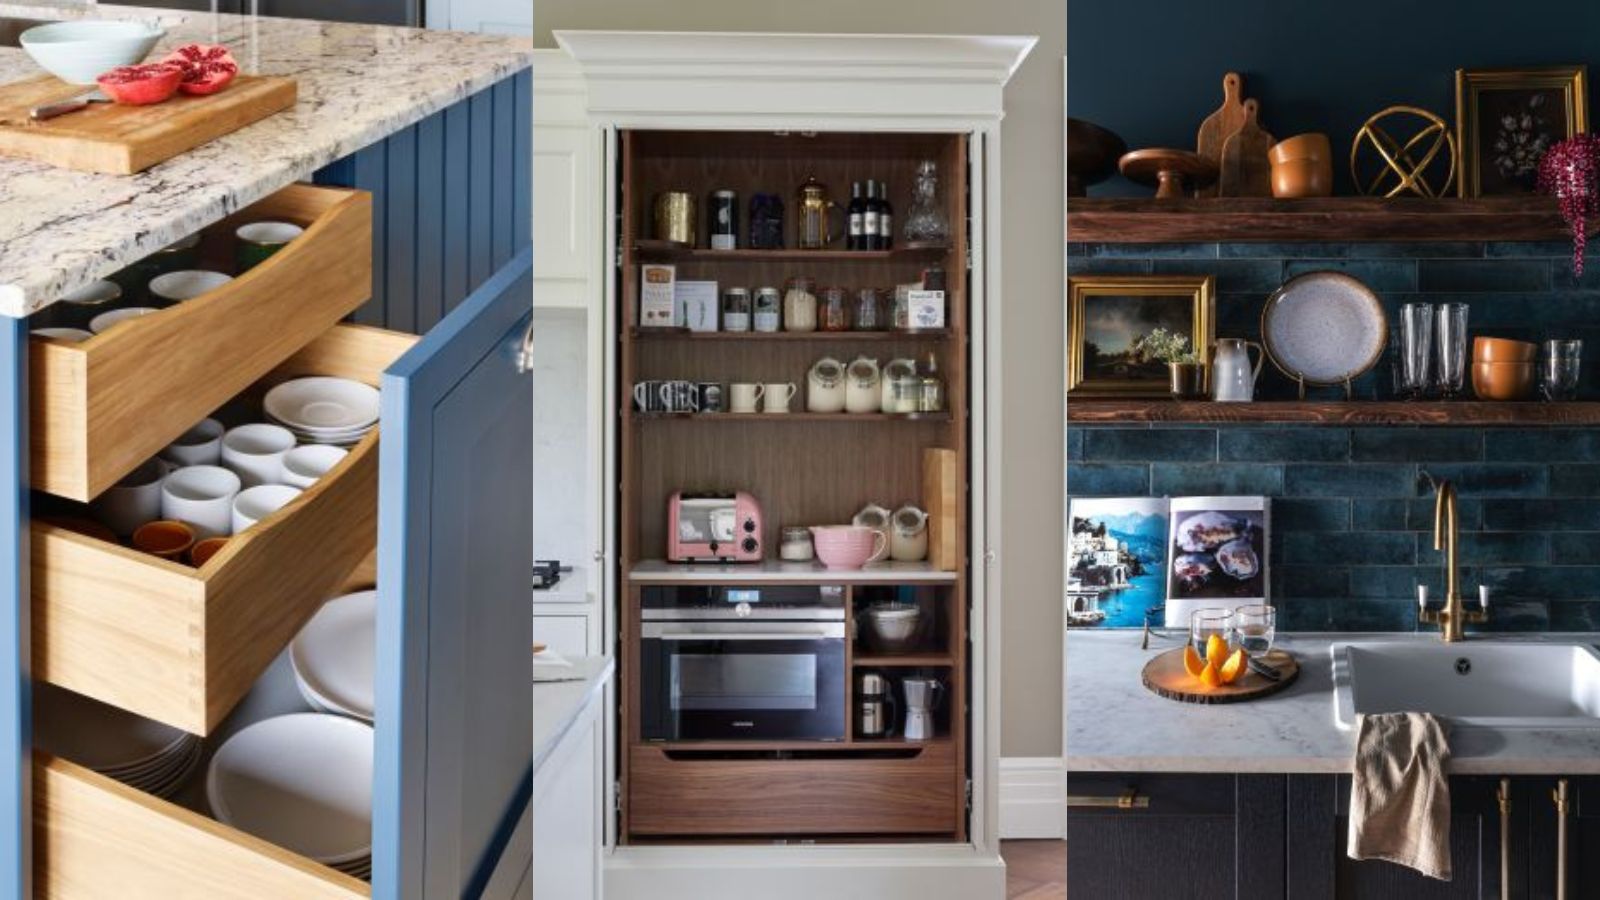 Pantry Storage Cabinets Built for Busy Kitchens